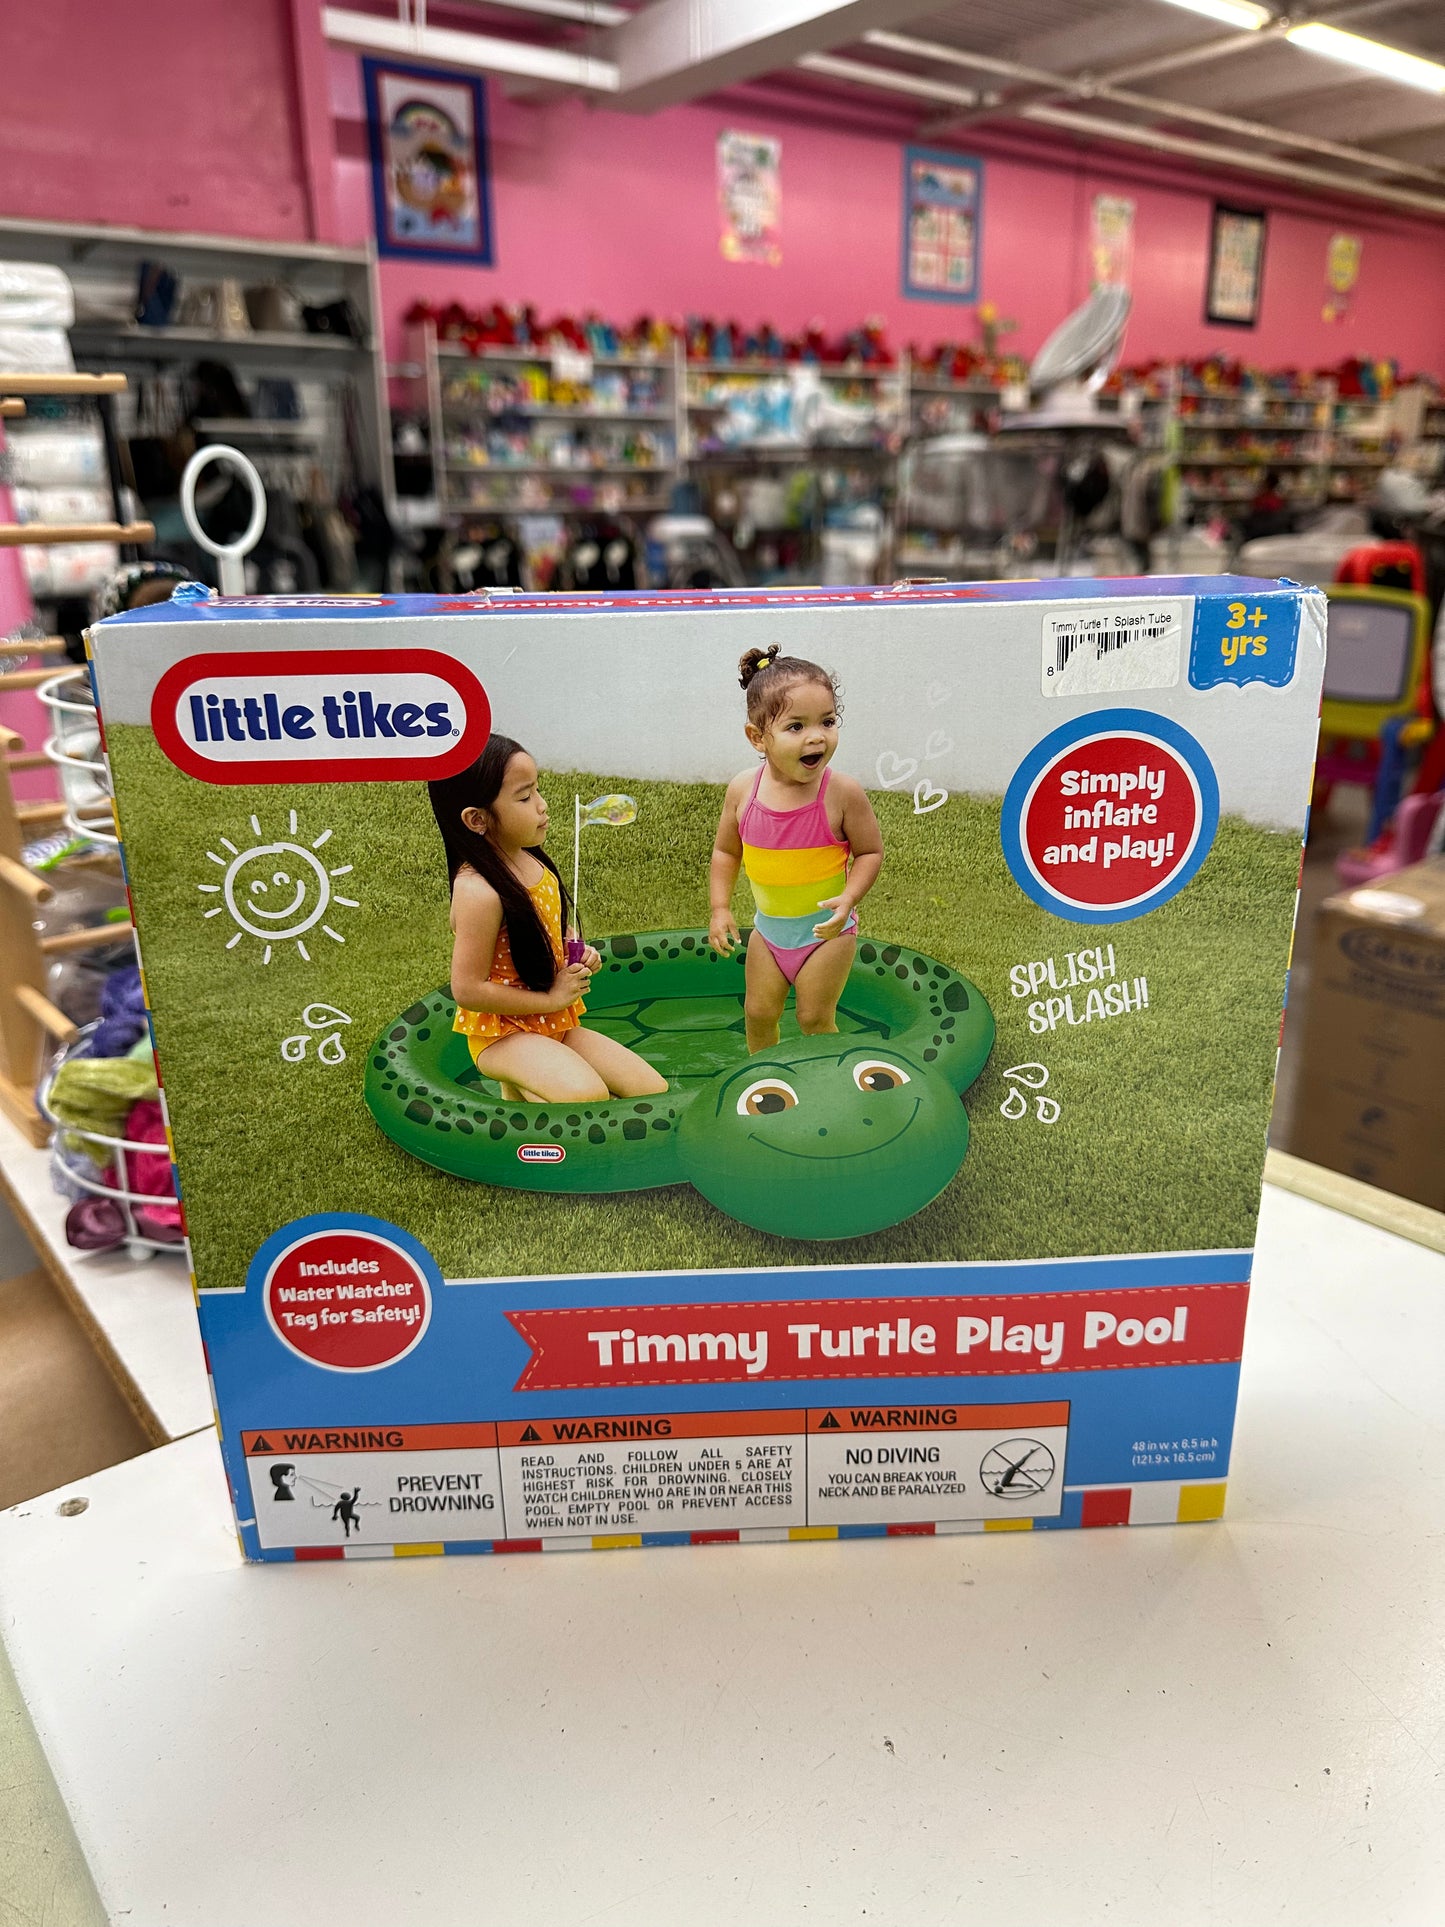 New Little Tikes Timmy Turtle Pool